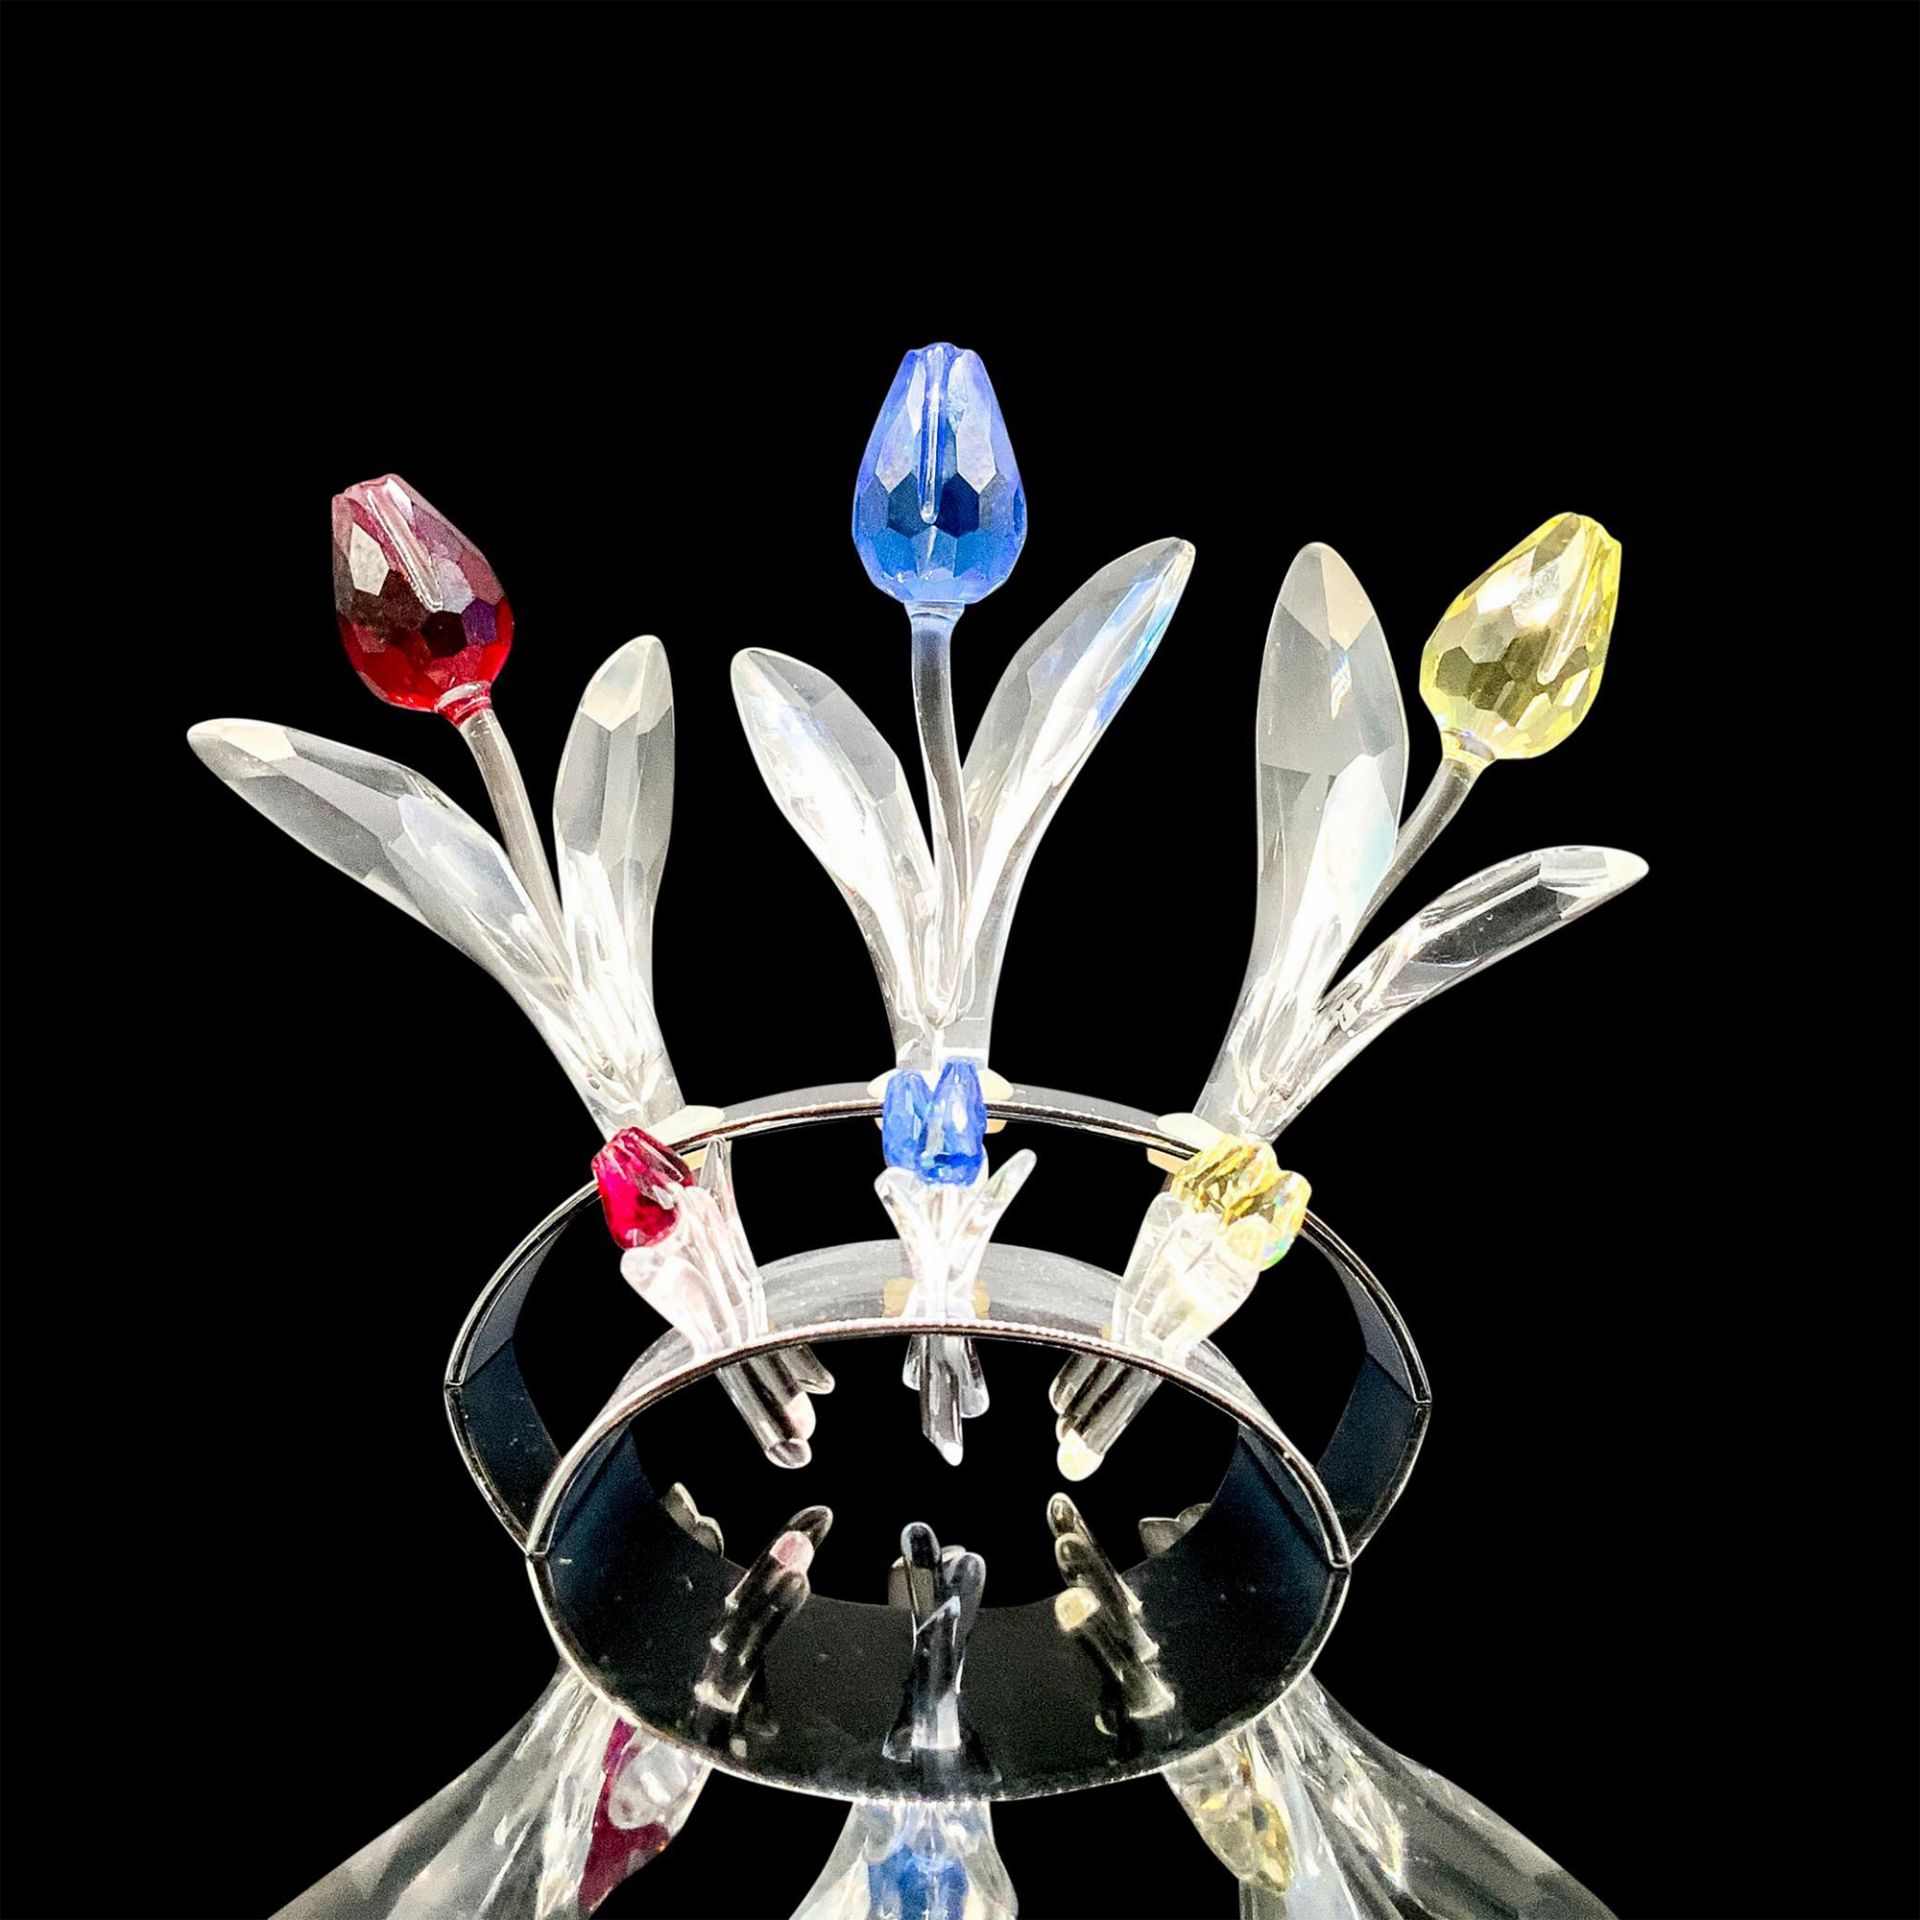 14pc Swarovski Crystal Figures and Stands, Tulips